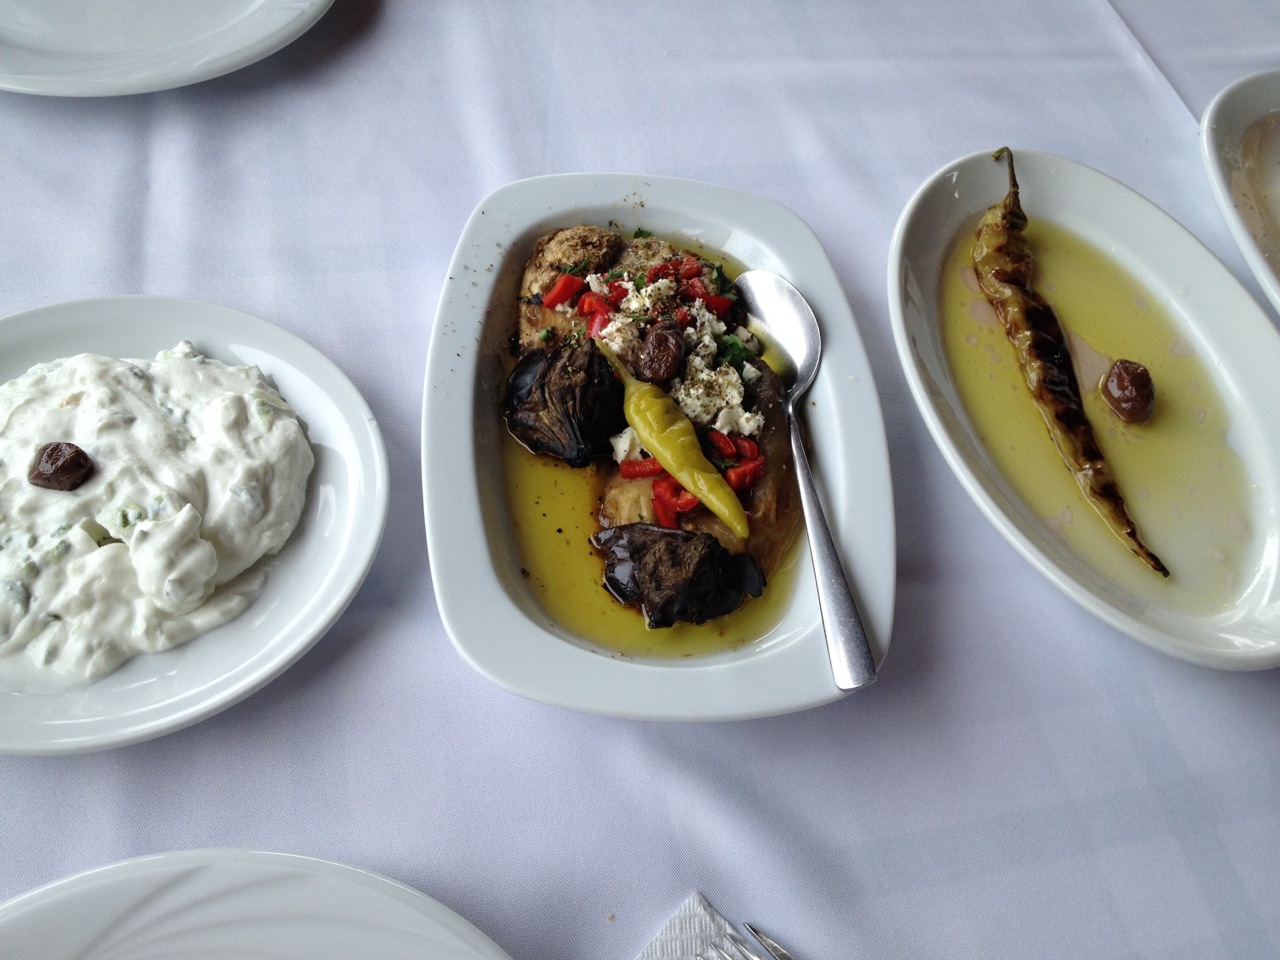 Great starters: tzatziki, baked eggplant and baked hot pepper